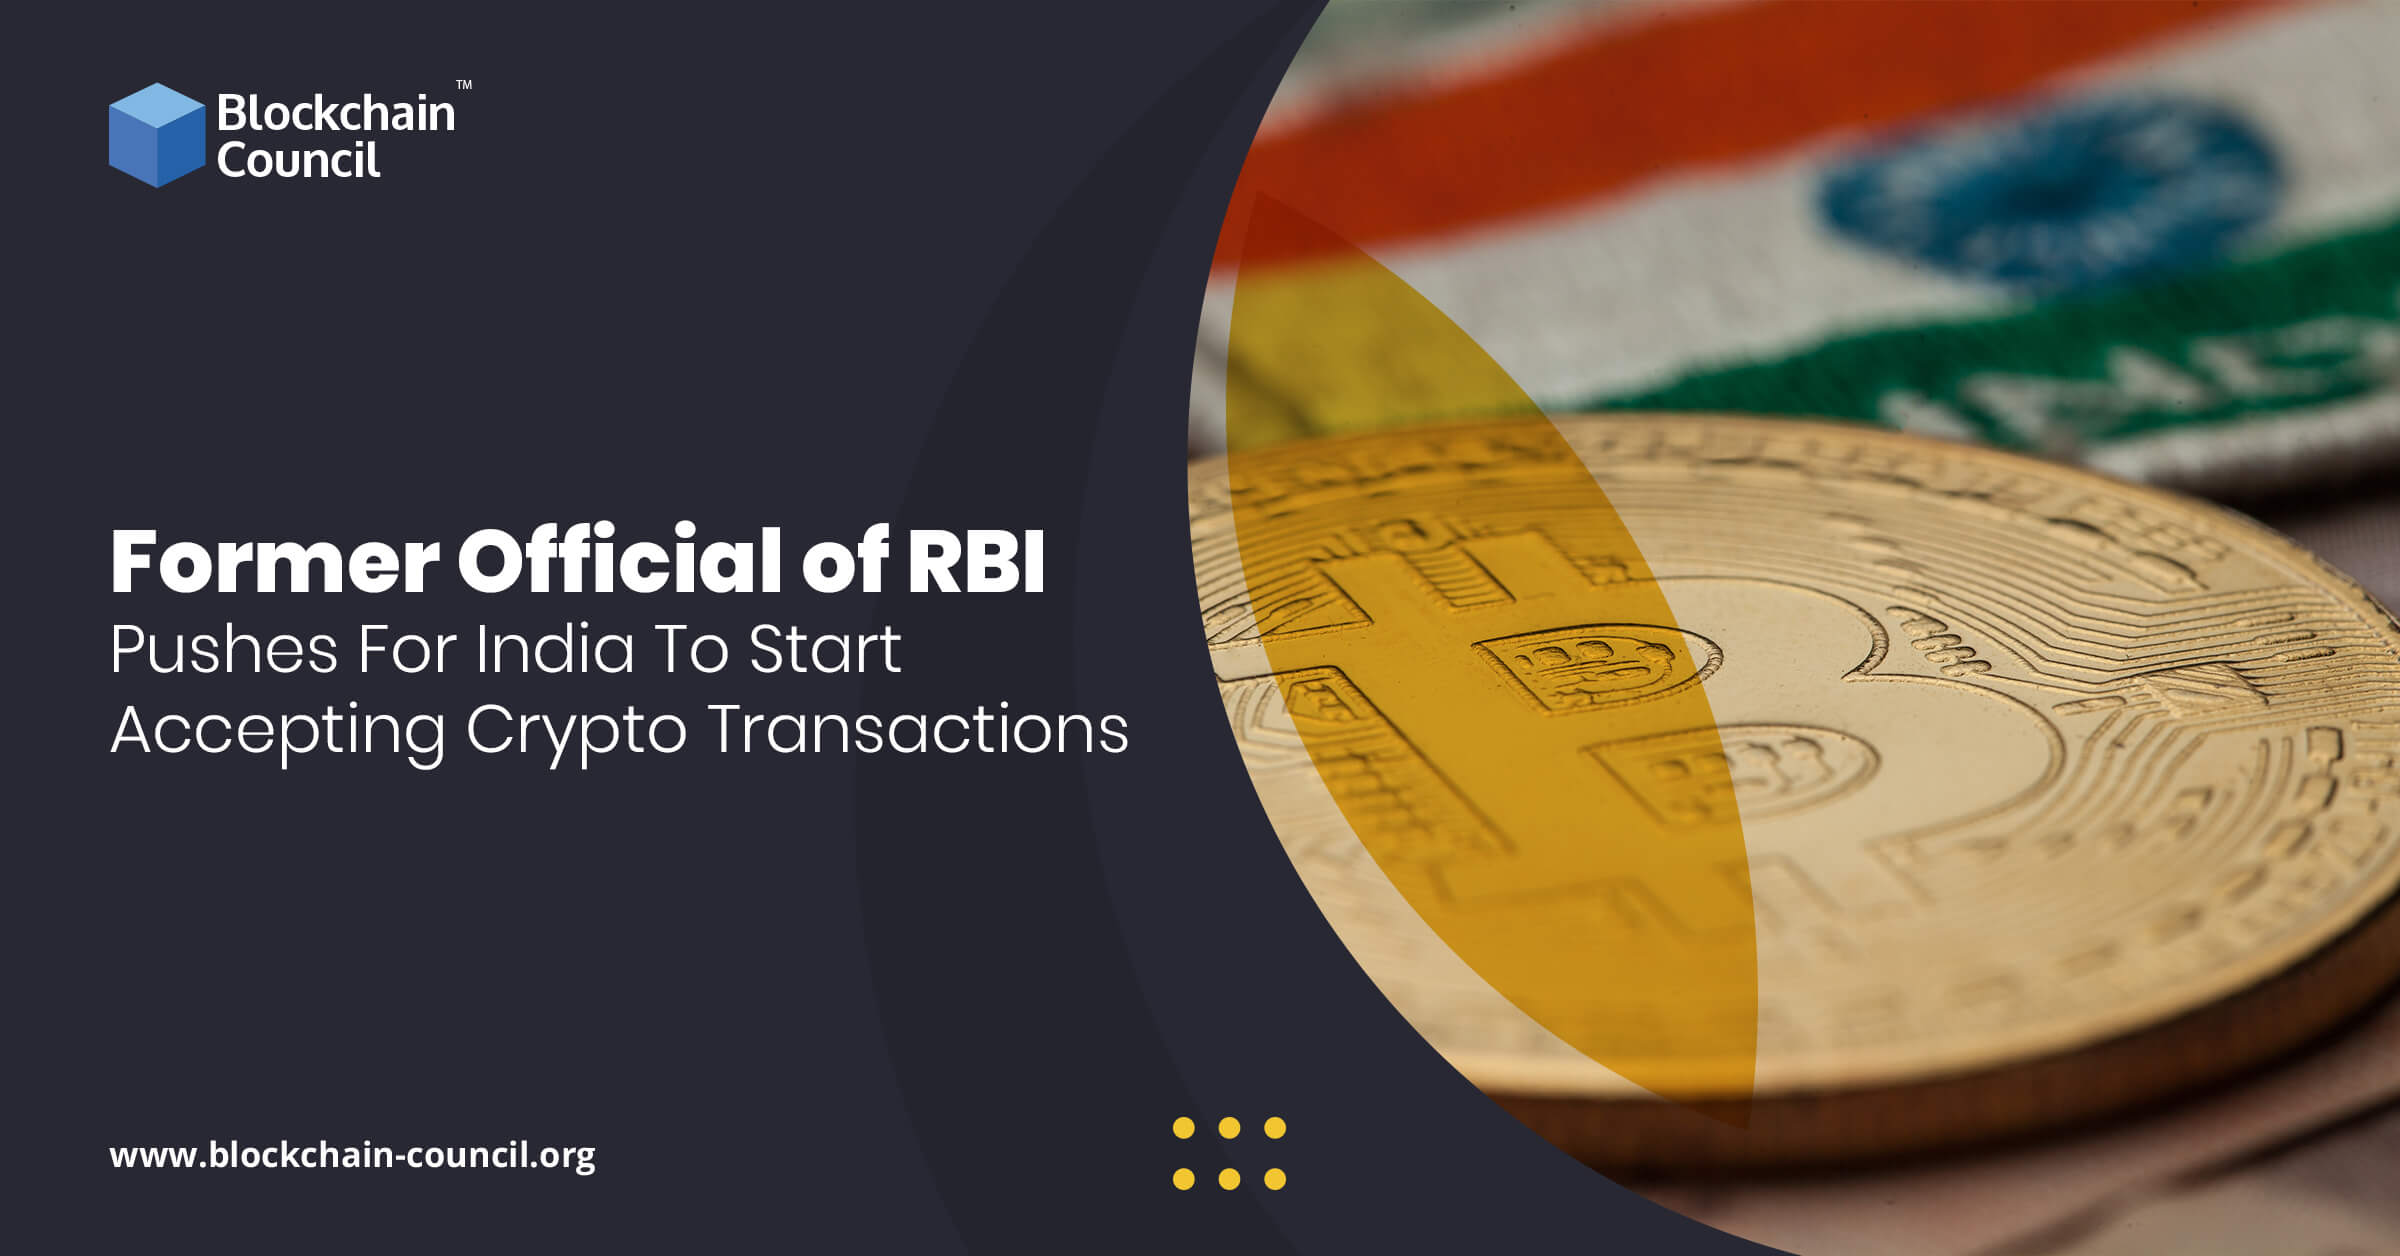 Former Official of RBI Pushes For India To Start Accepting Crypto Transactions